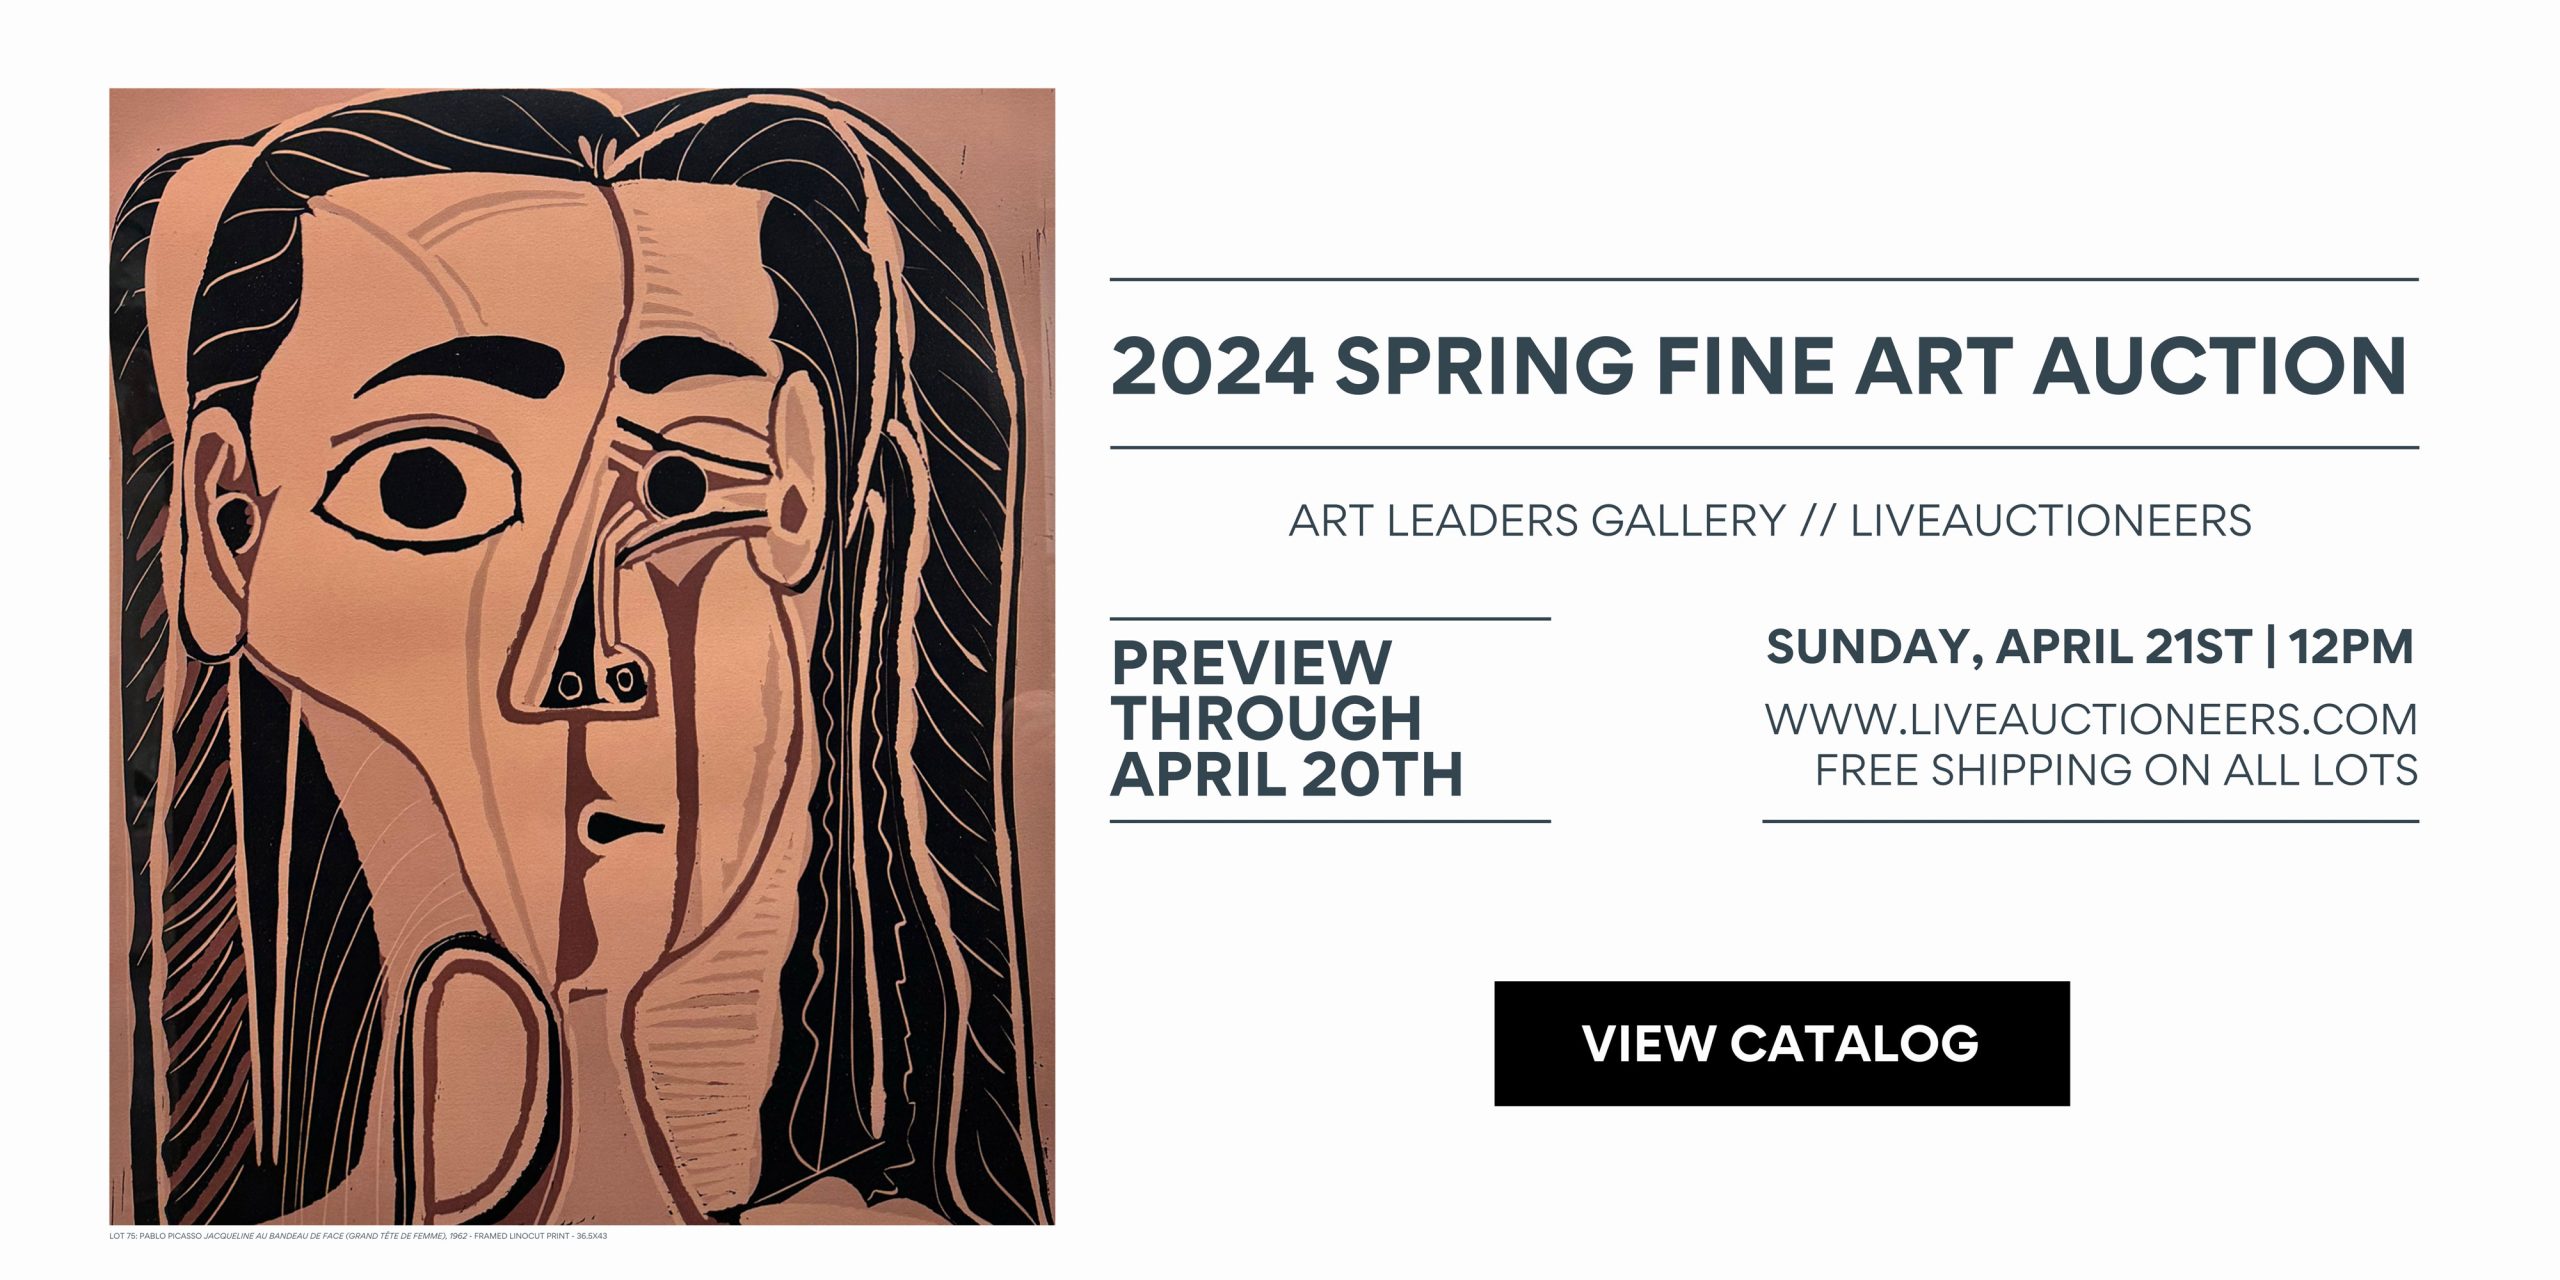 2024 Spring Art Auction Banner with Live Auctioneers. View catalog link